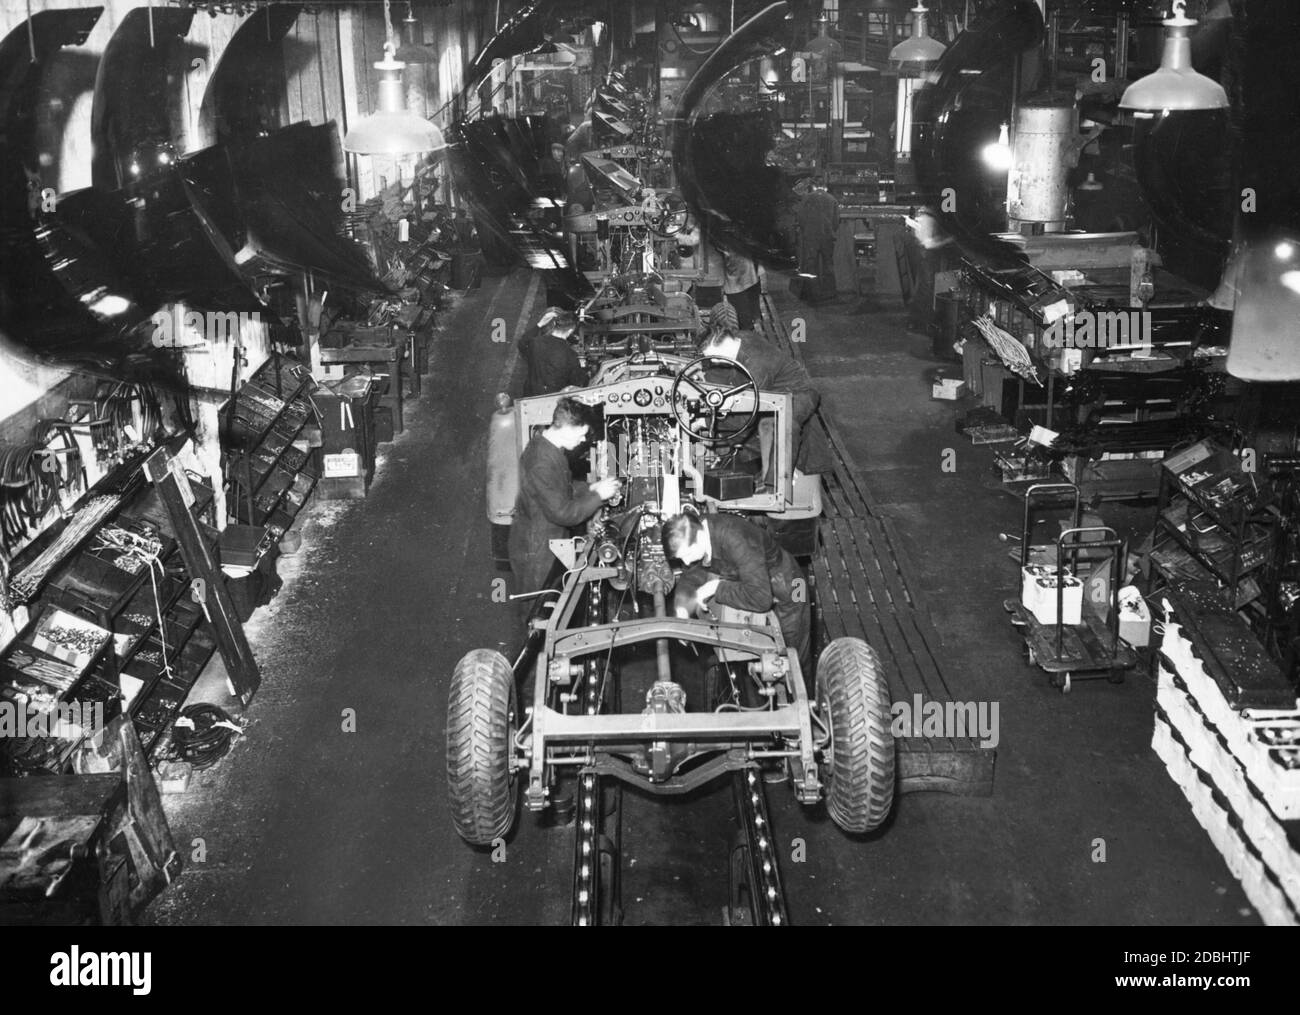 Workers assemble military vehicles in an English armaments factory. Stock Photo